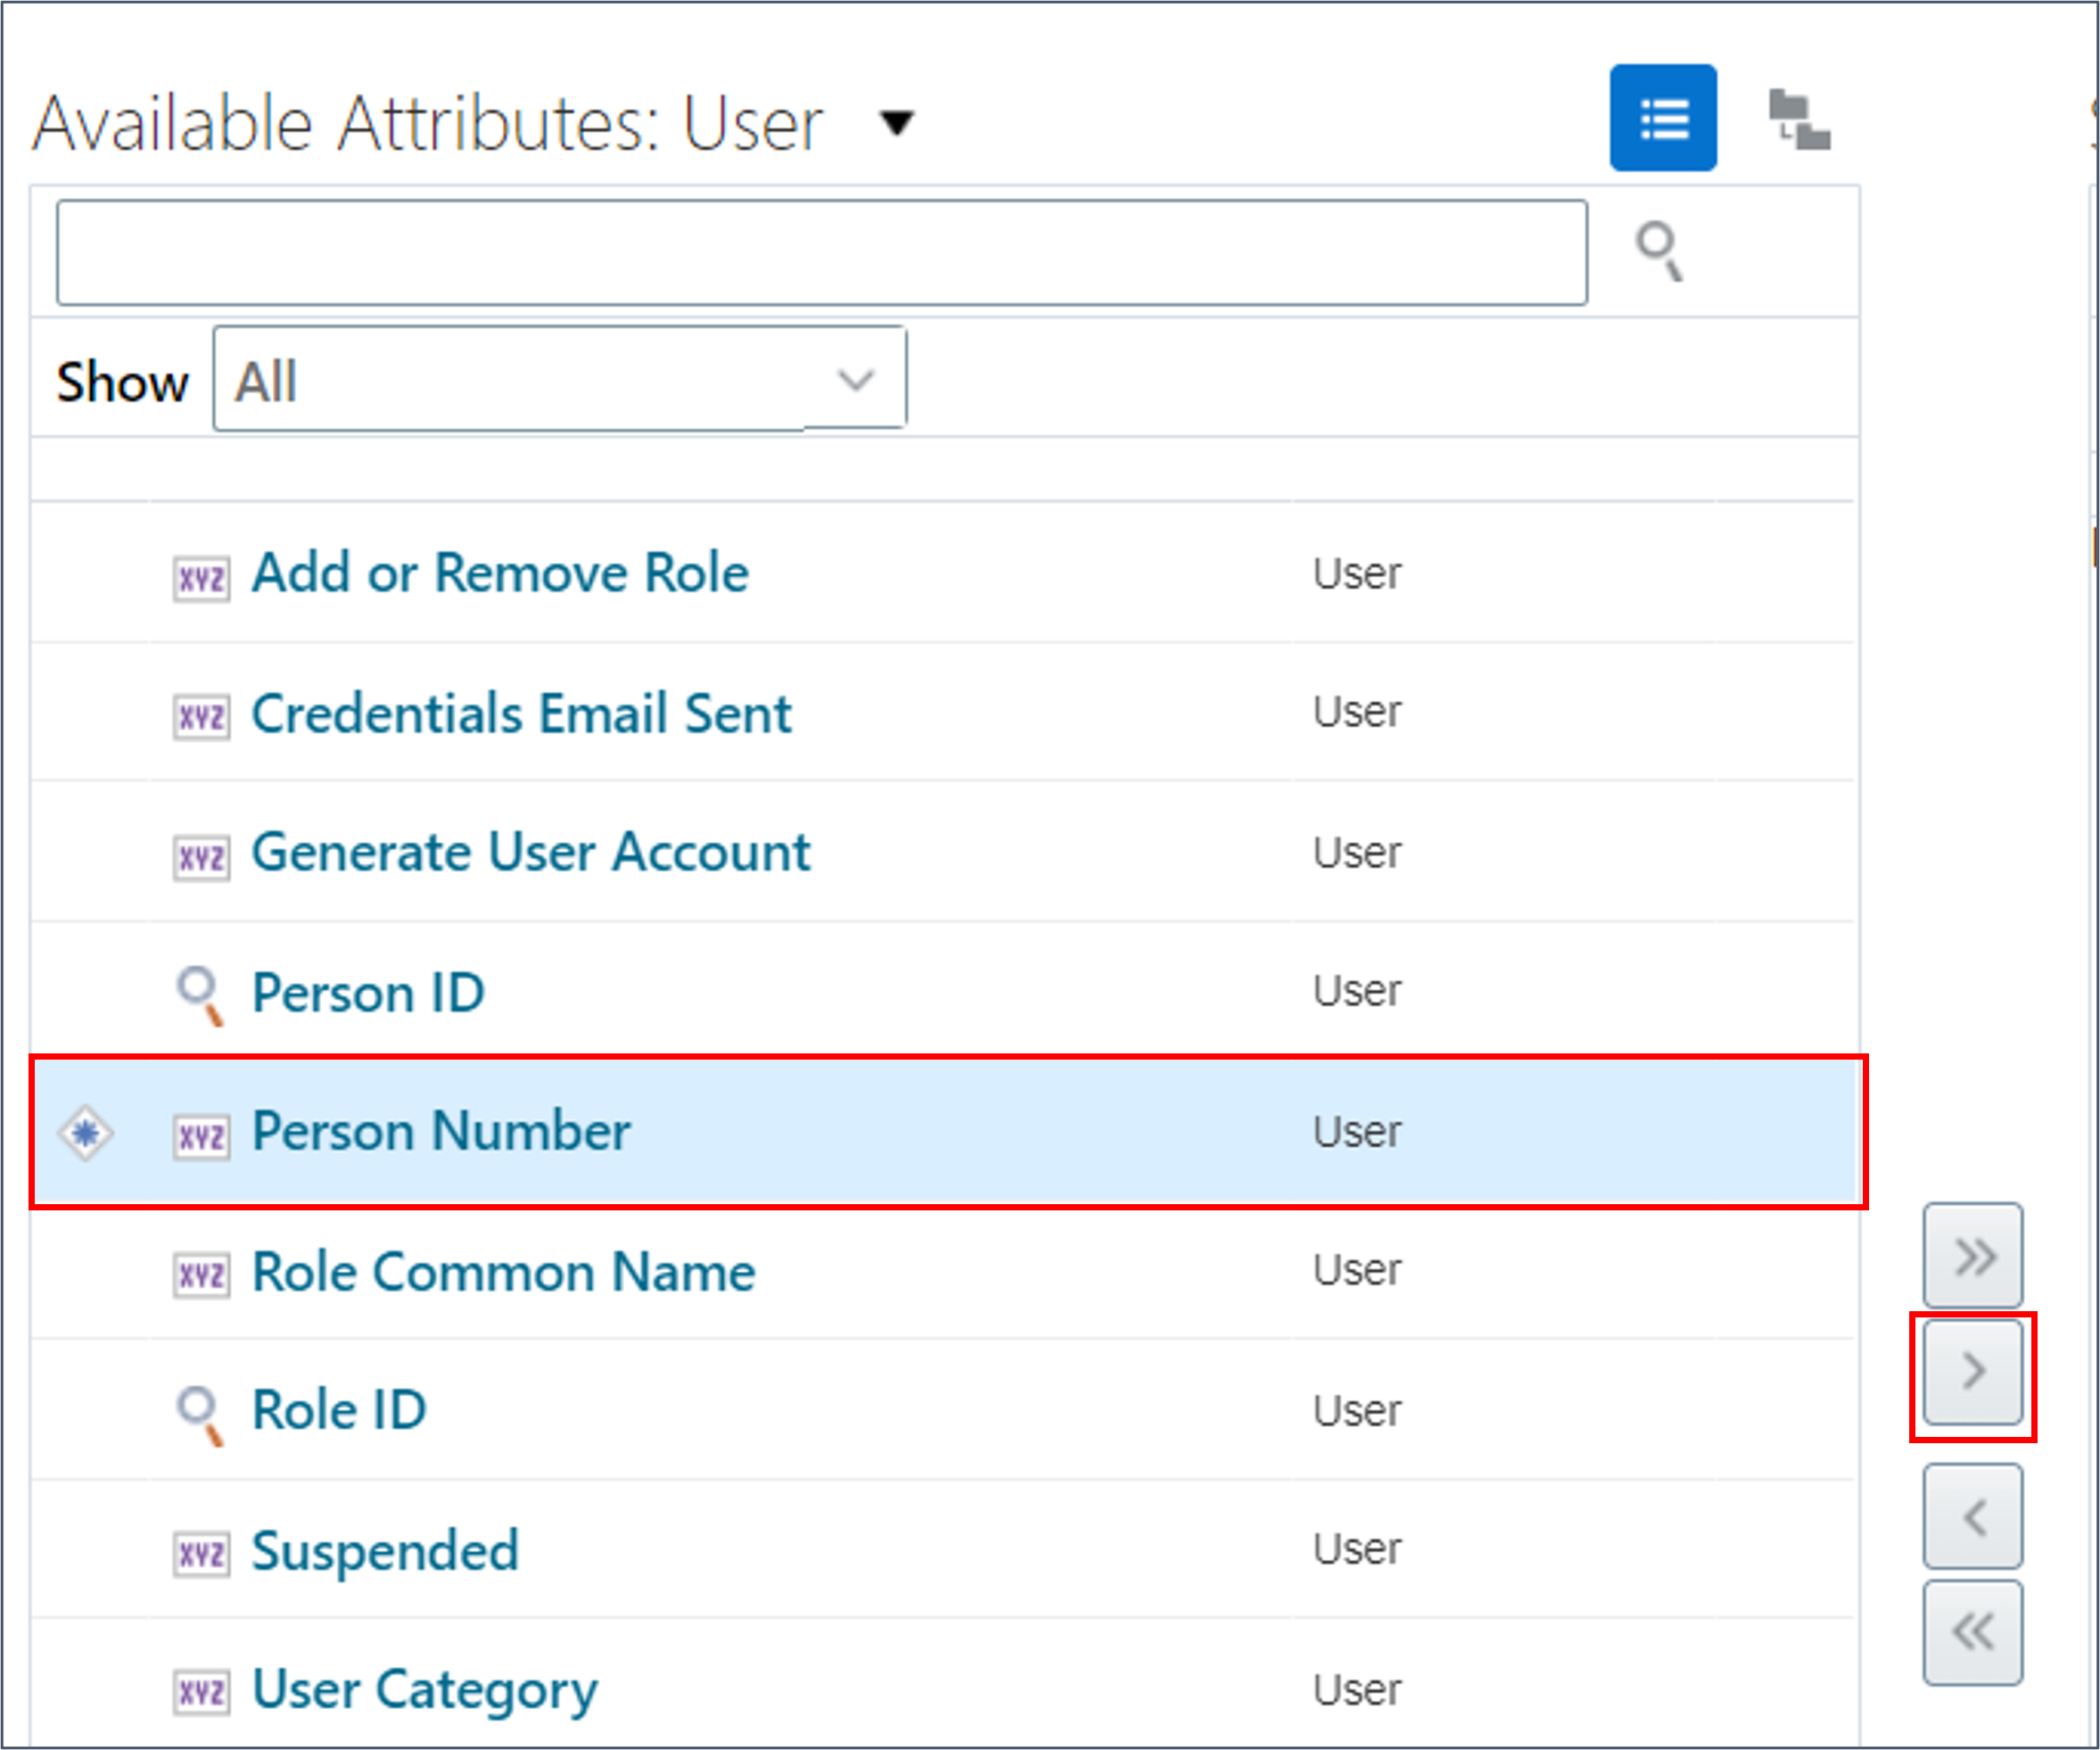 Select Person Number and add it to Selected Attributes